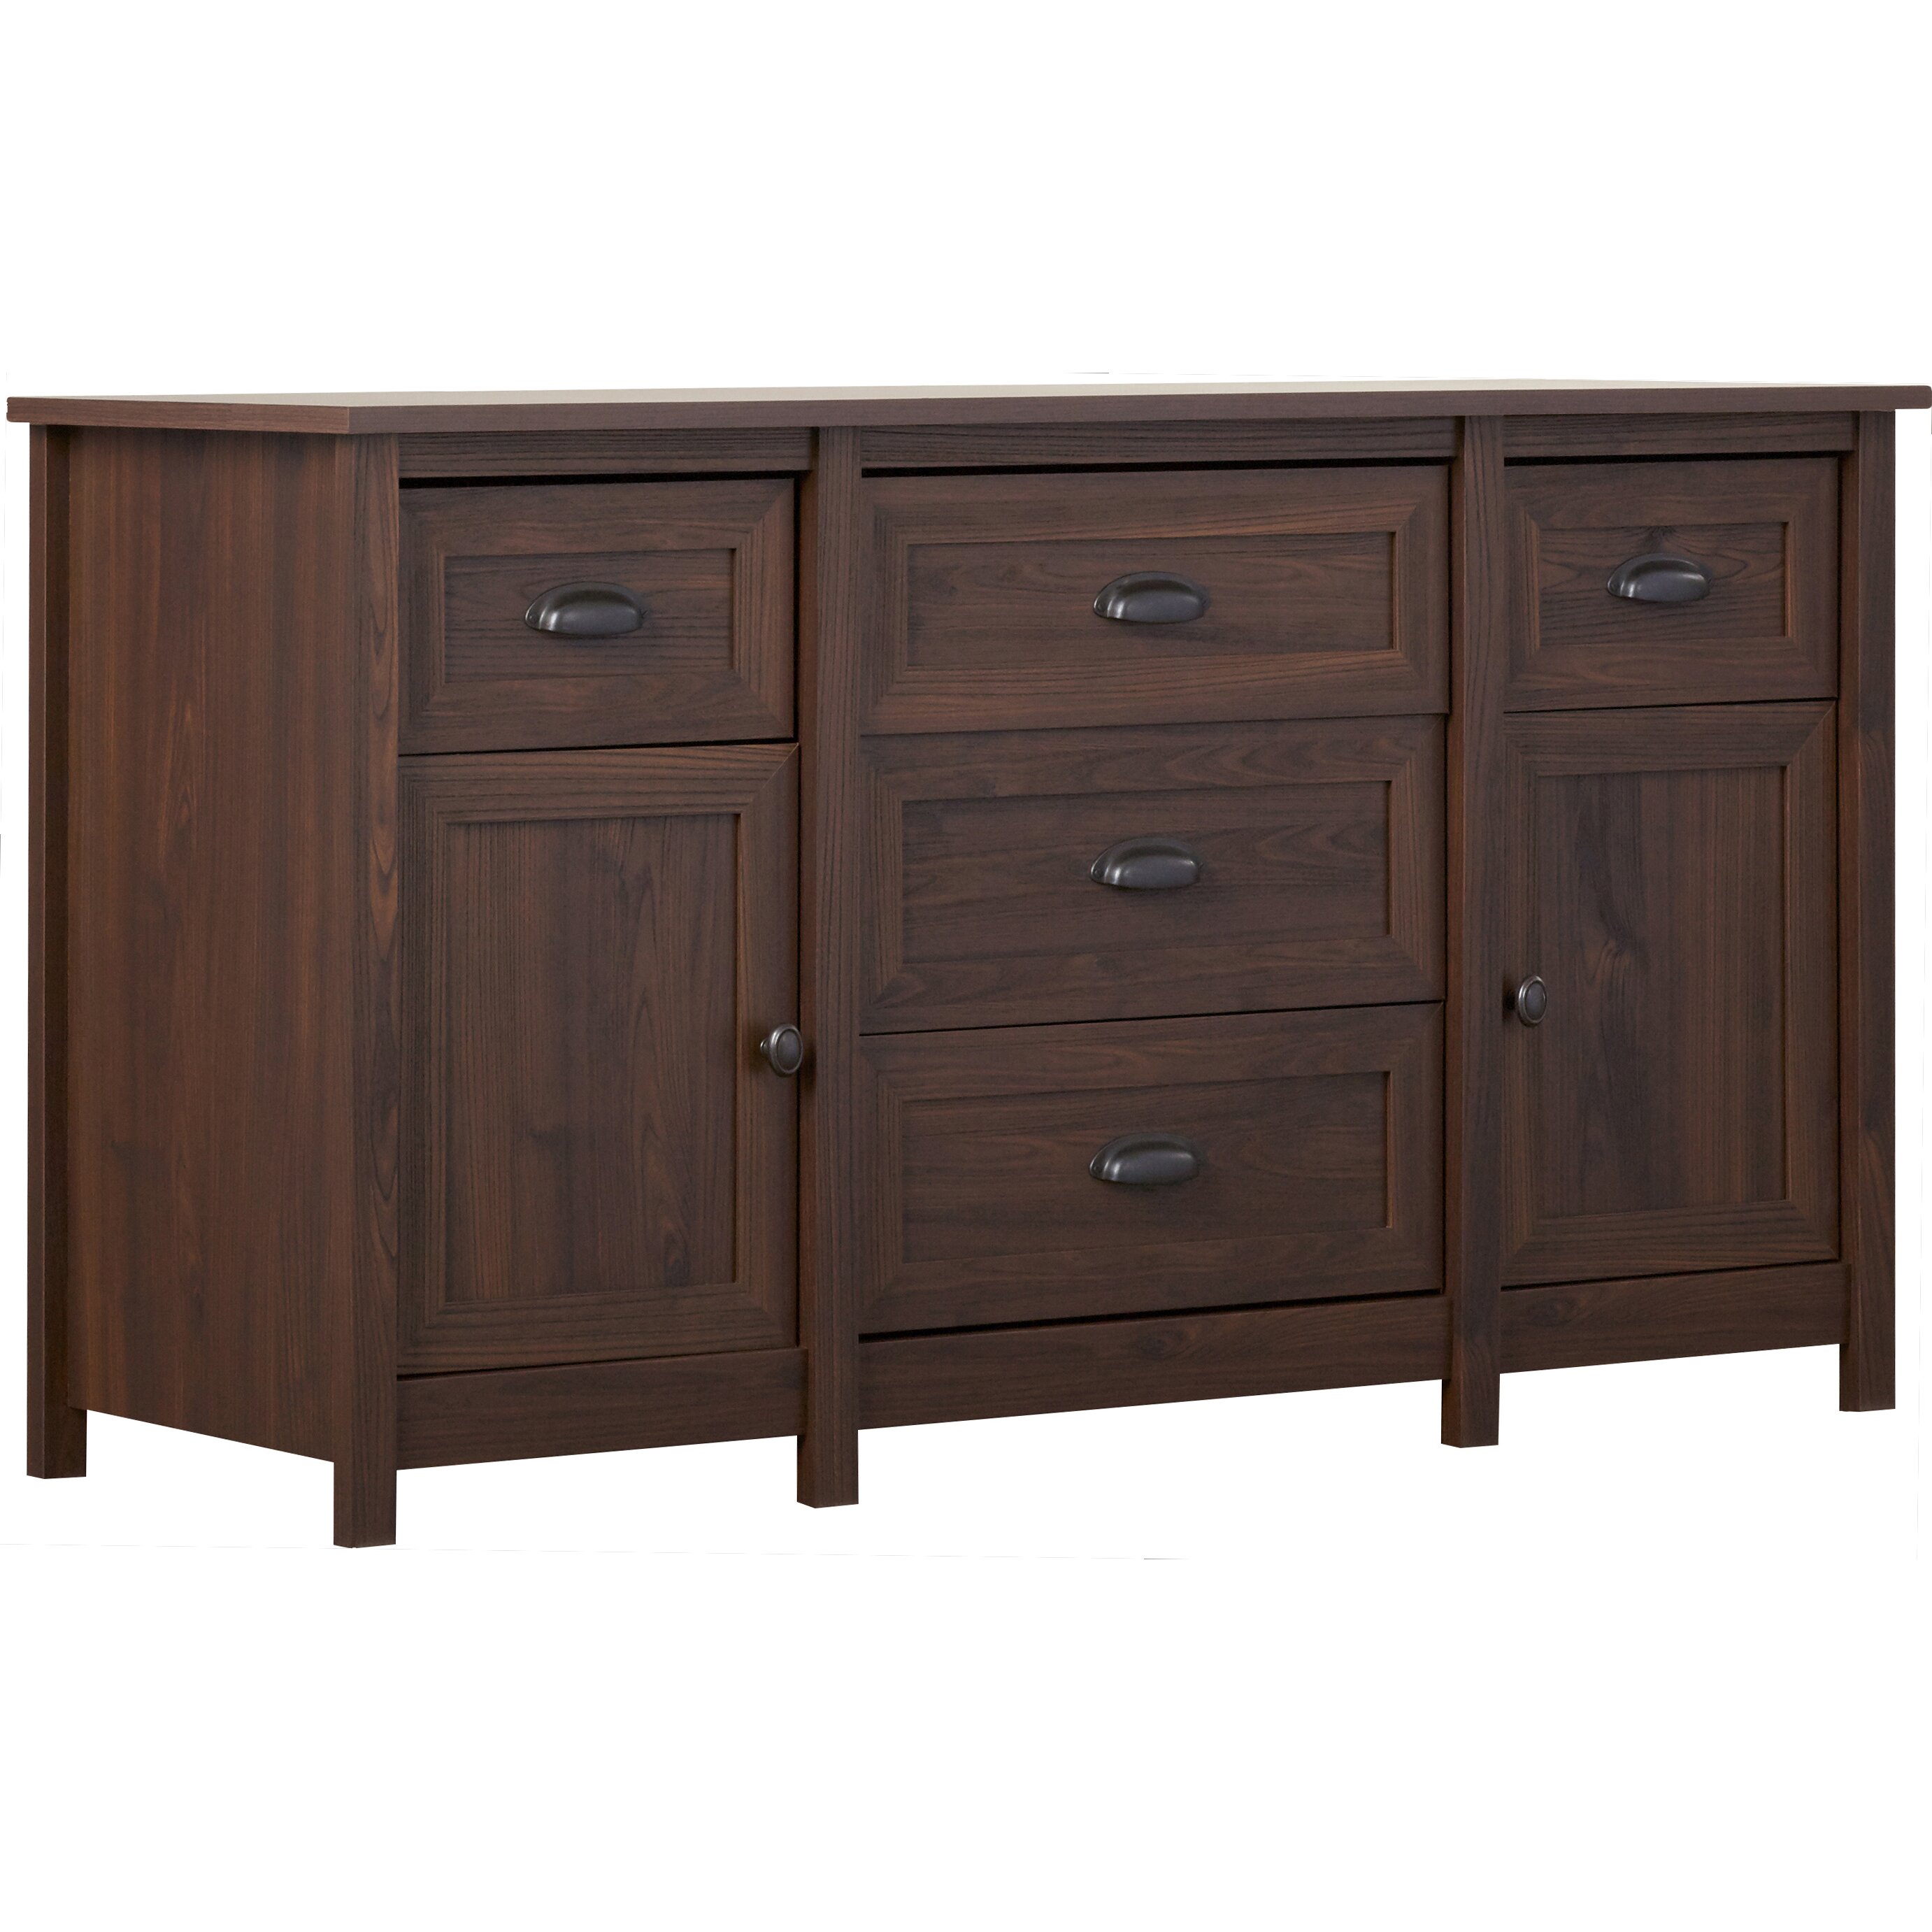 Darby Home Co Coombs TV Stand & Reviews | Wayfair